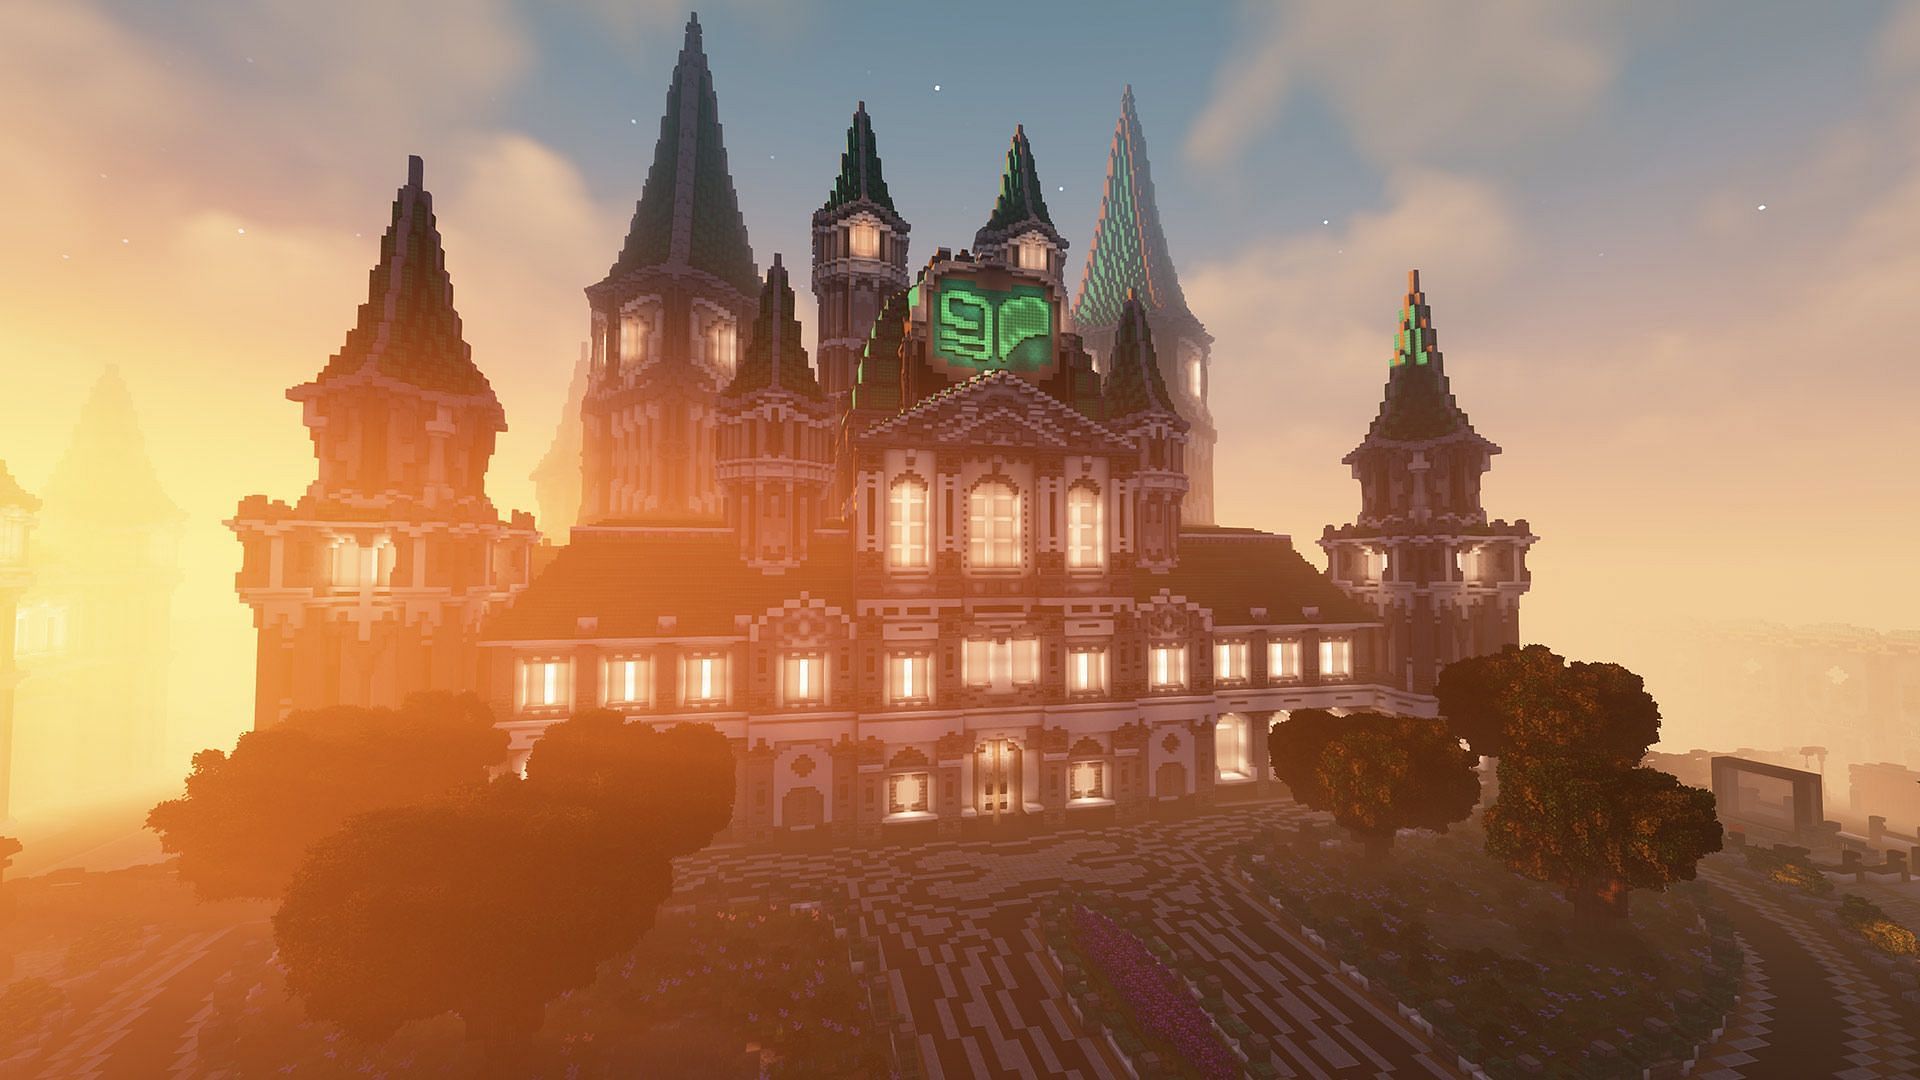 Top 15 Minecraft Castle Ideas And Designs In 2022 - BrightChamps Blog